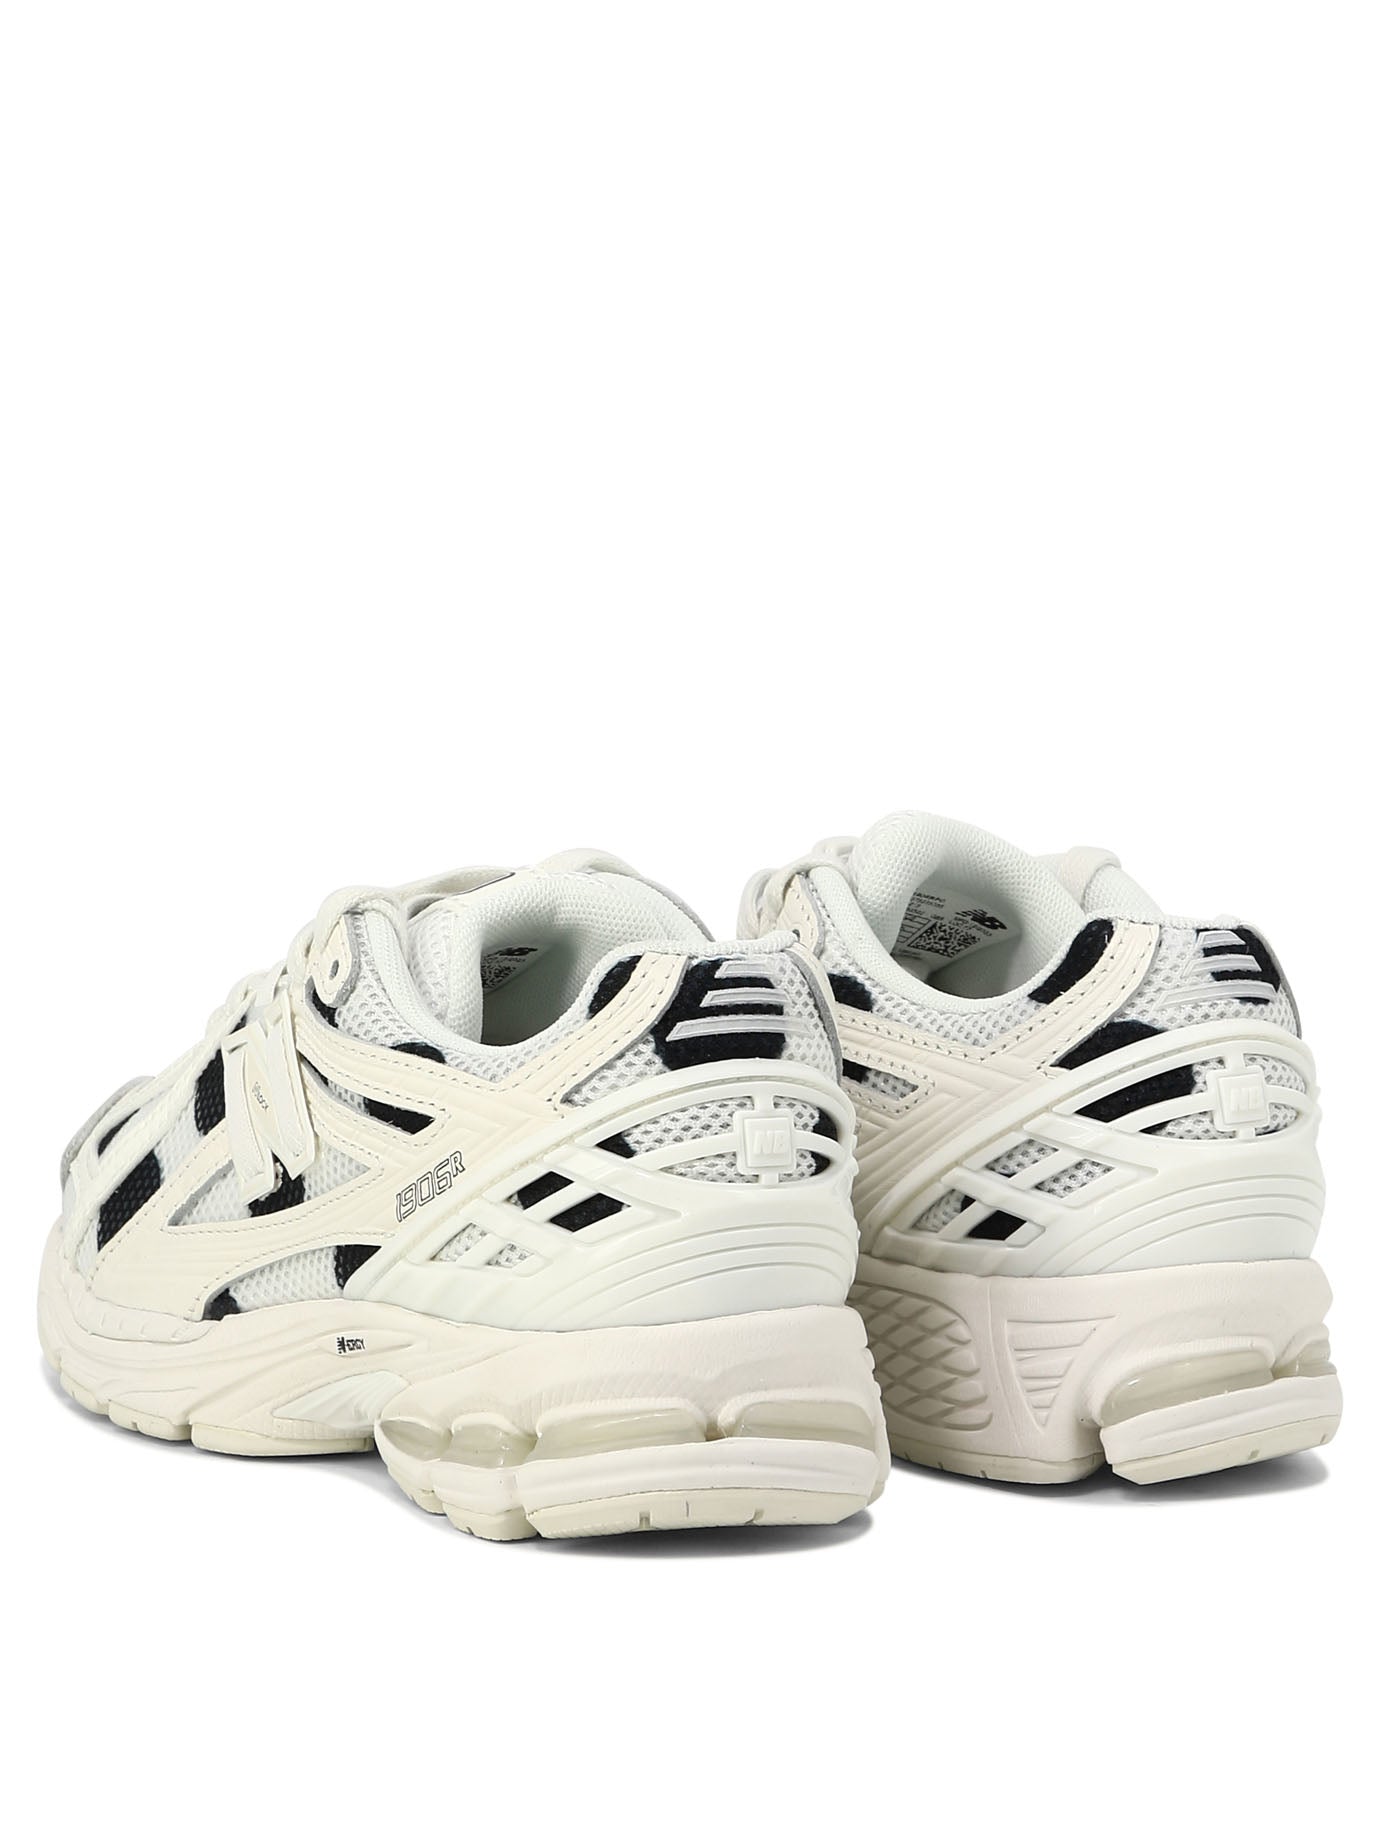 Shop New Balance "1906" Sneakers